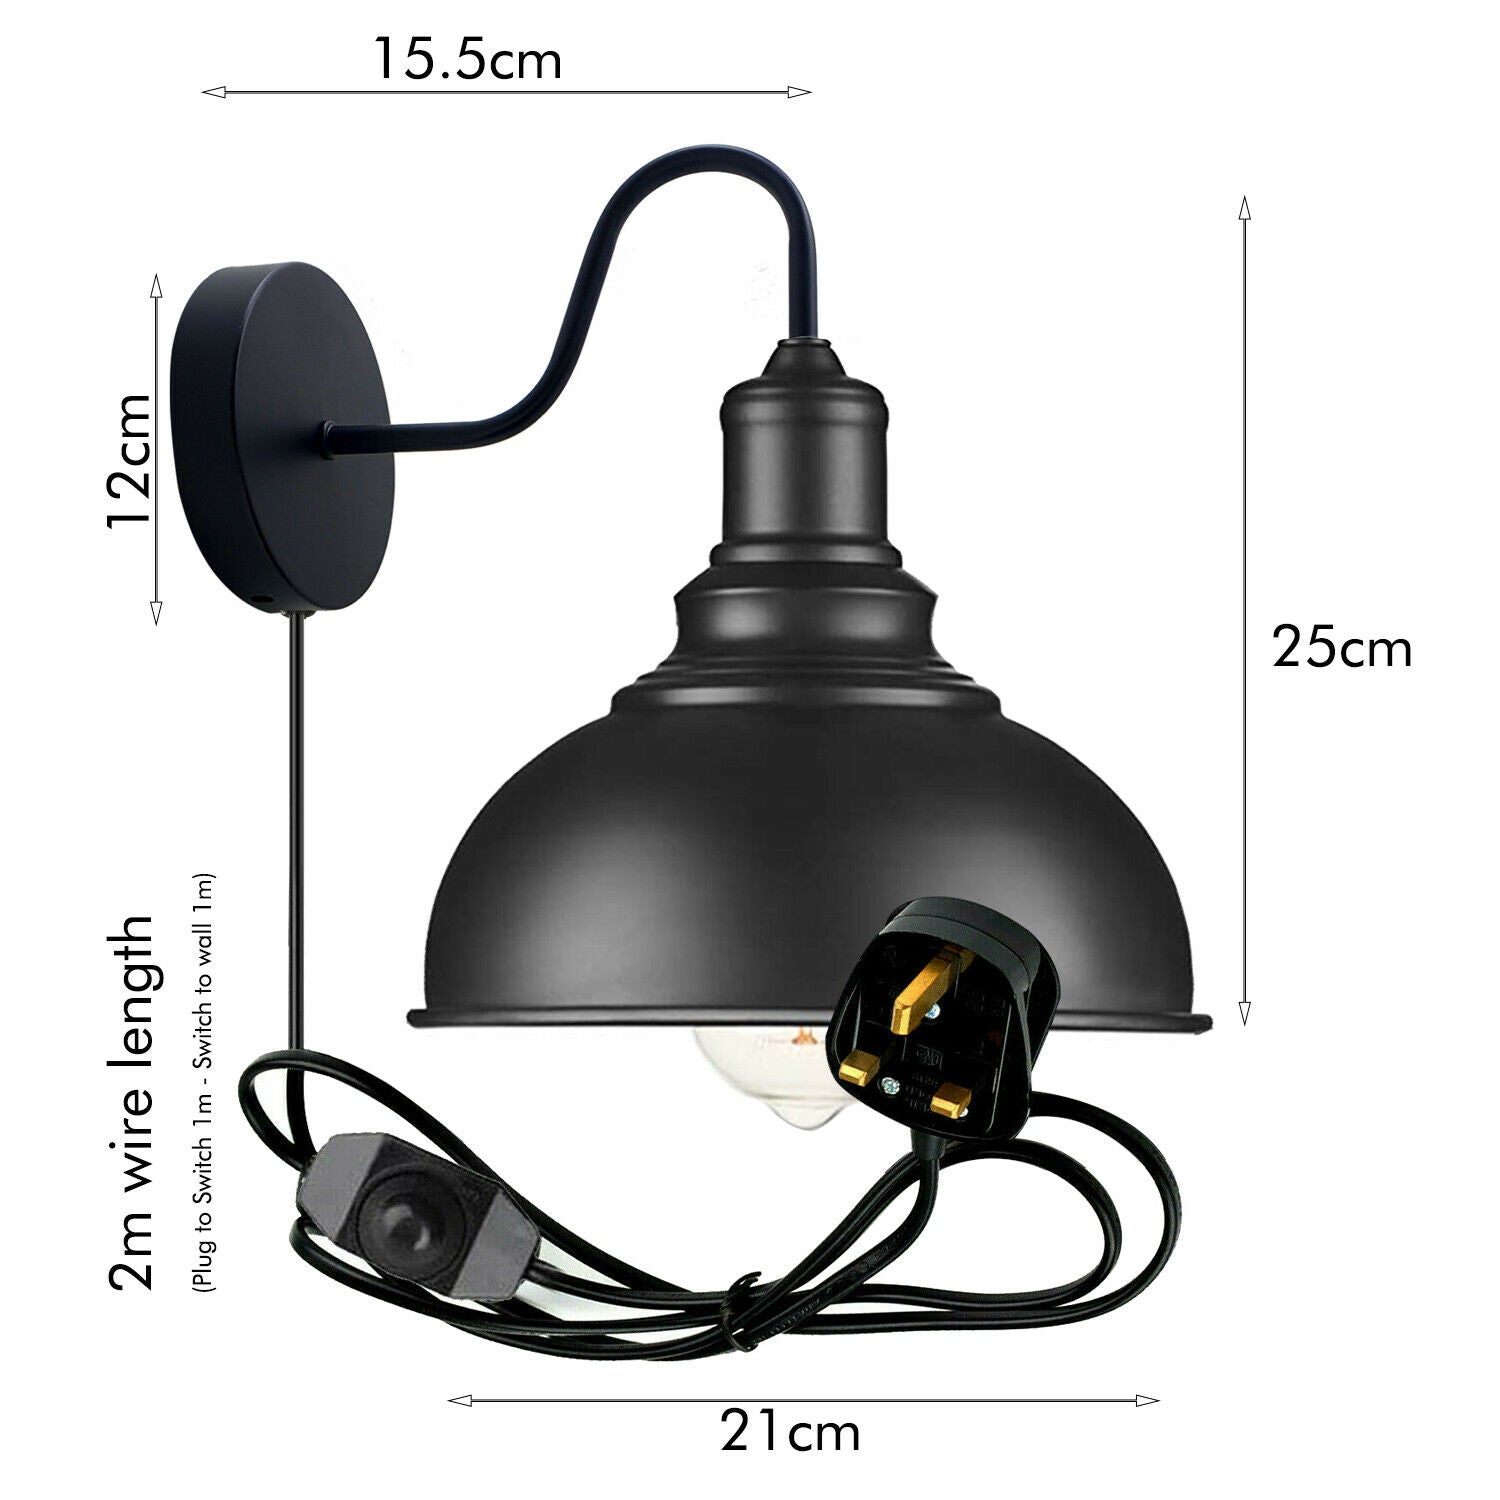 Dimmer Switch Black dome shade swan neck plug in wall lights